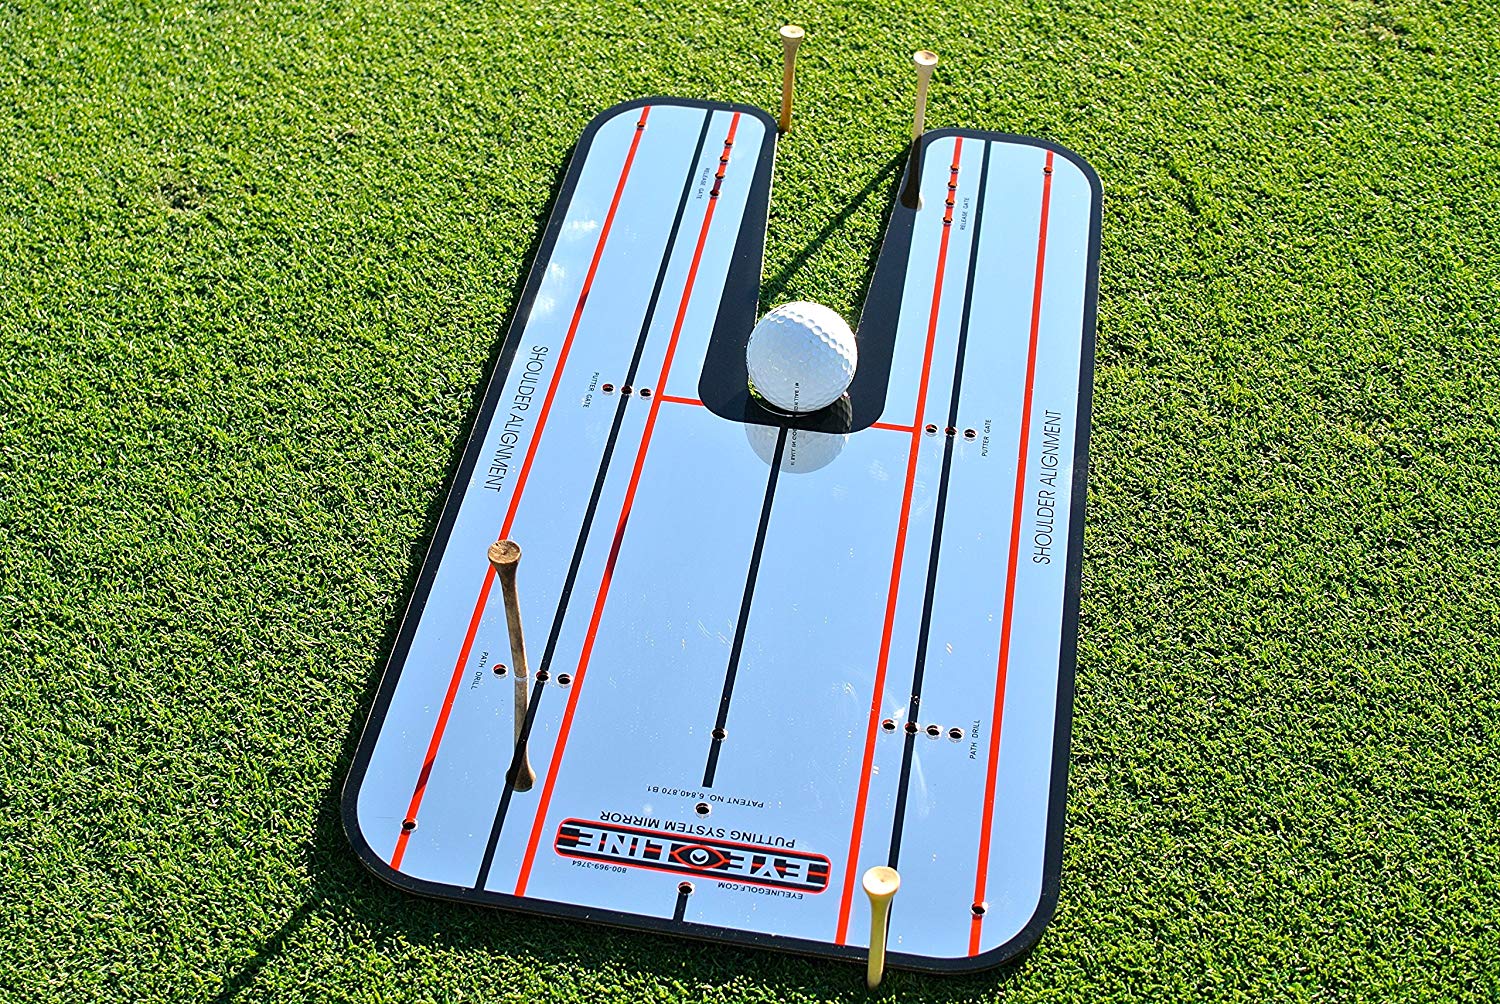 Use the Eyeline Golf Putting Mirror to improve your aim